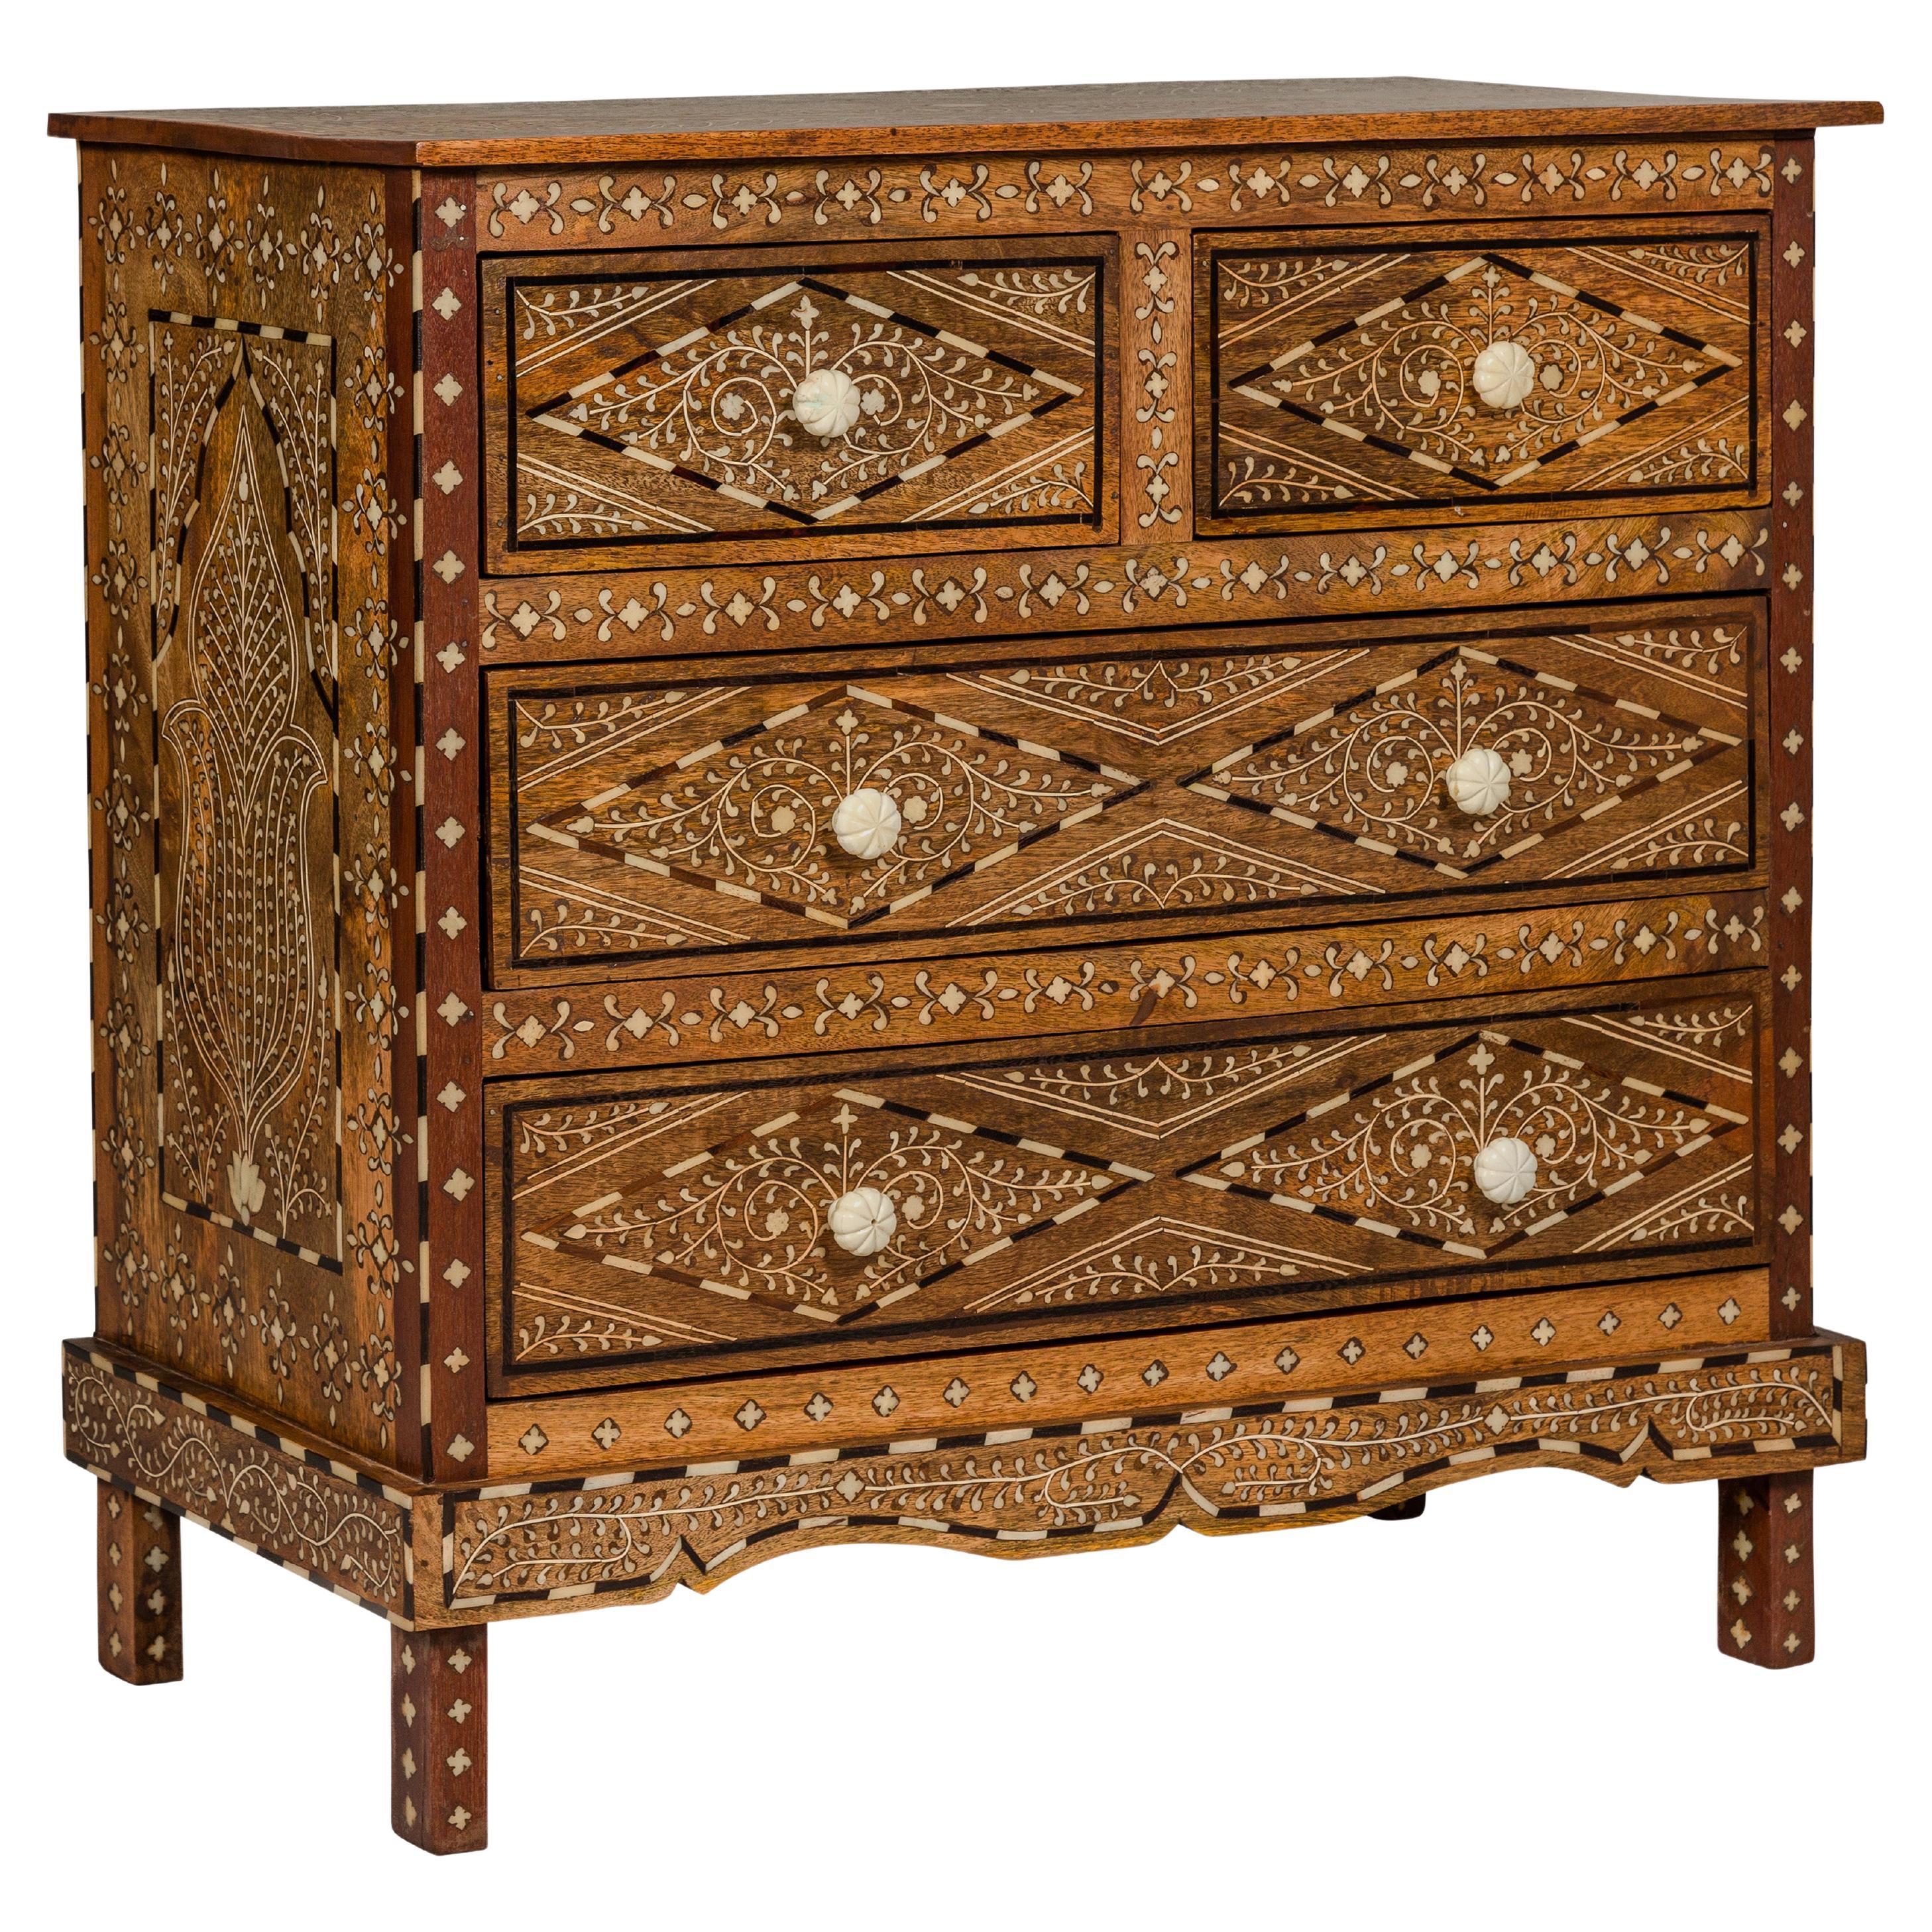 Anglo-Indian Style Mango Wood Four-Drawer Chest with Foliage Bone Inlay For Sale